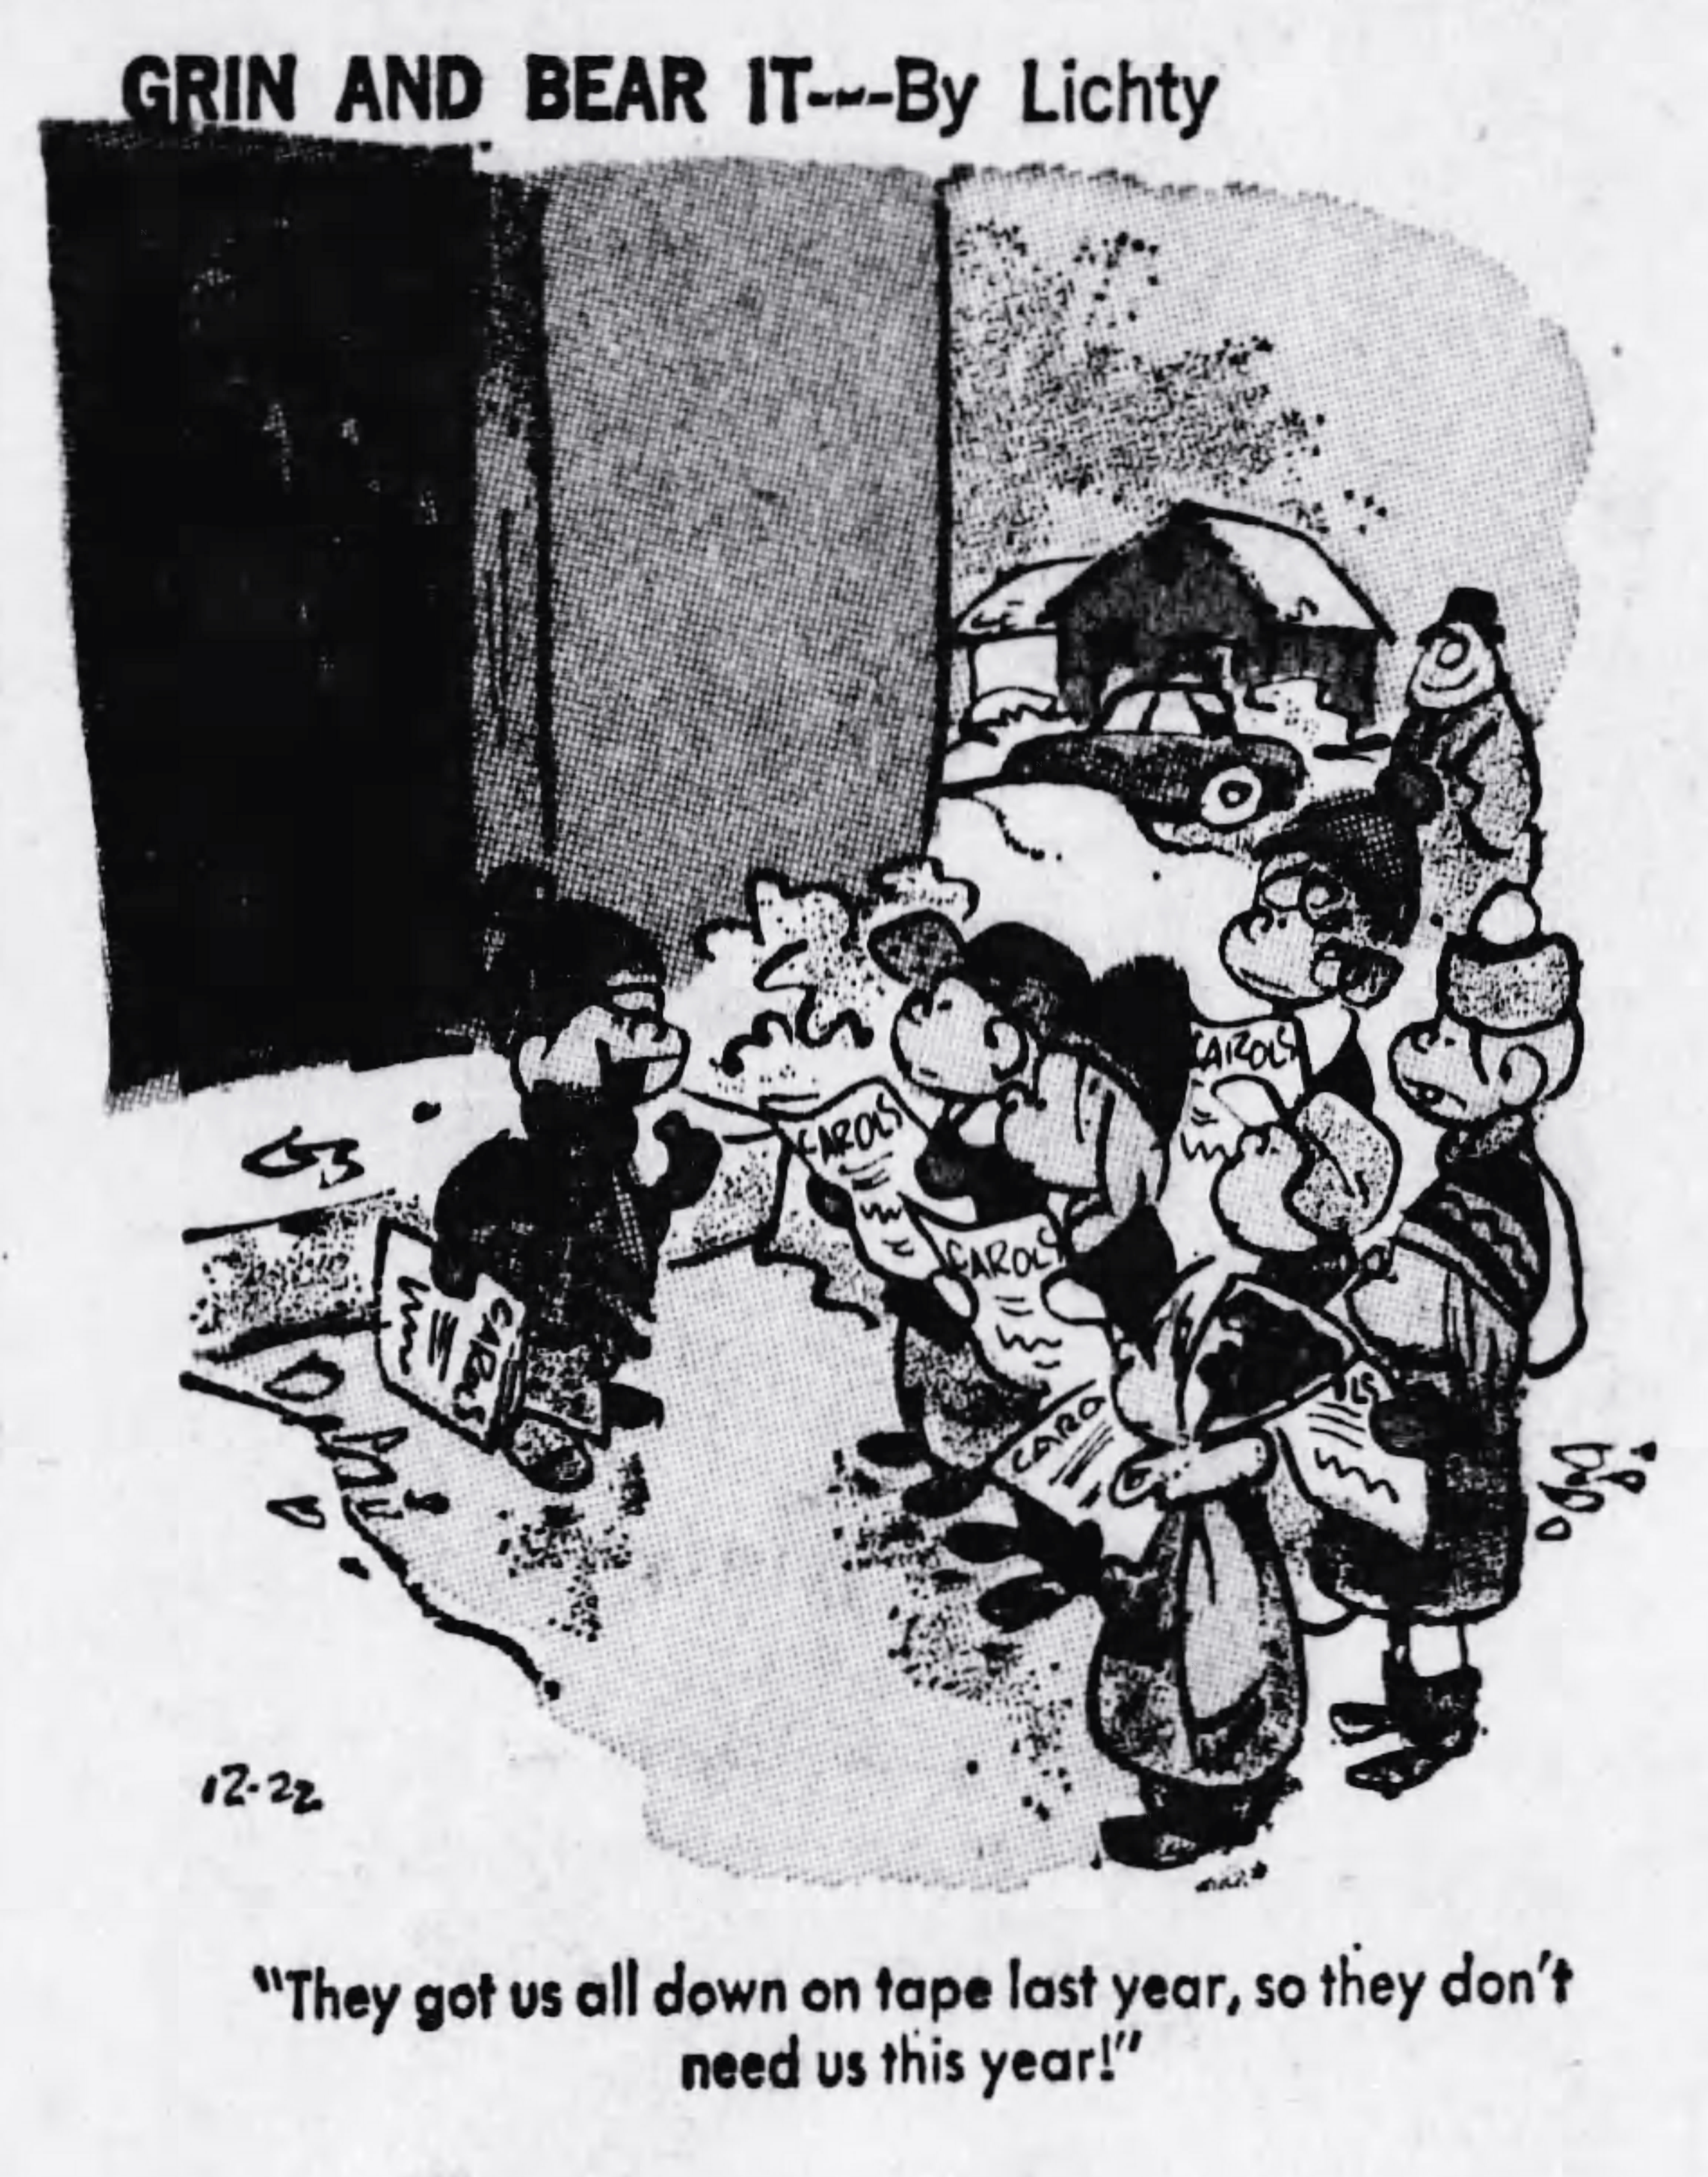 Grin and Bear It, December 22, 1972